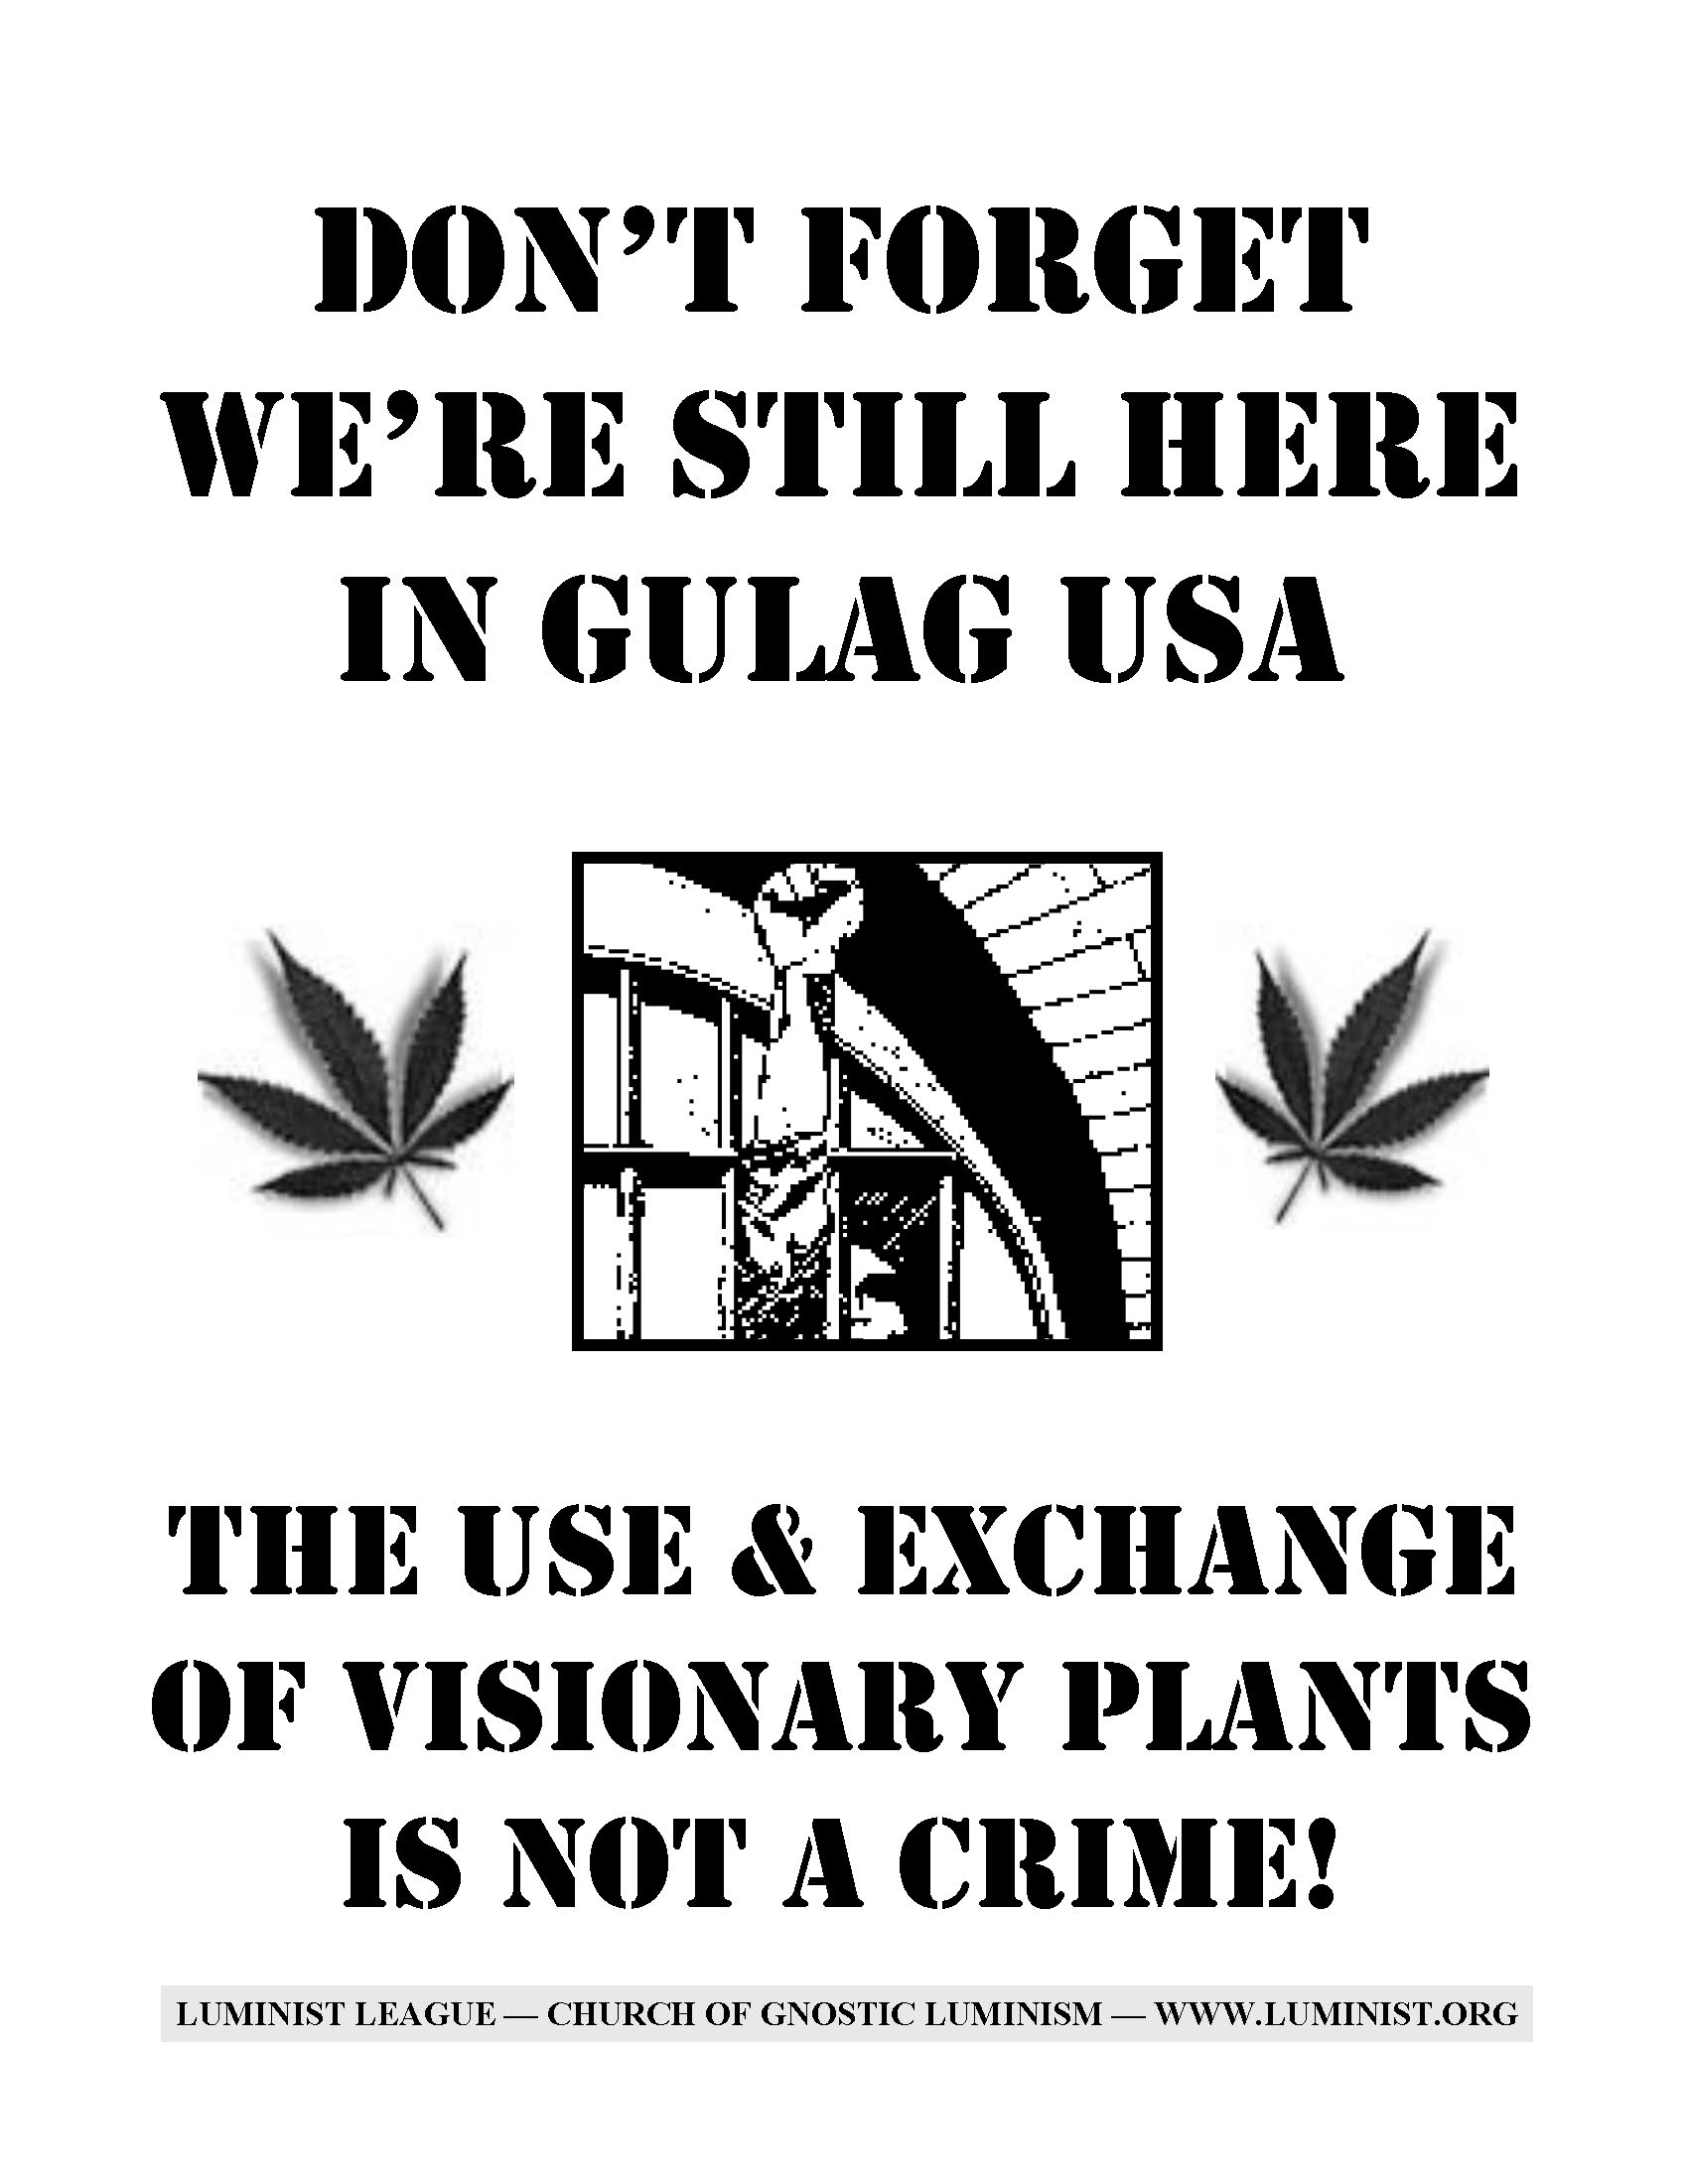 Don't forget we're still here in Gulag USA